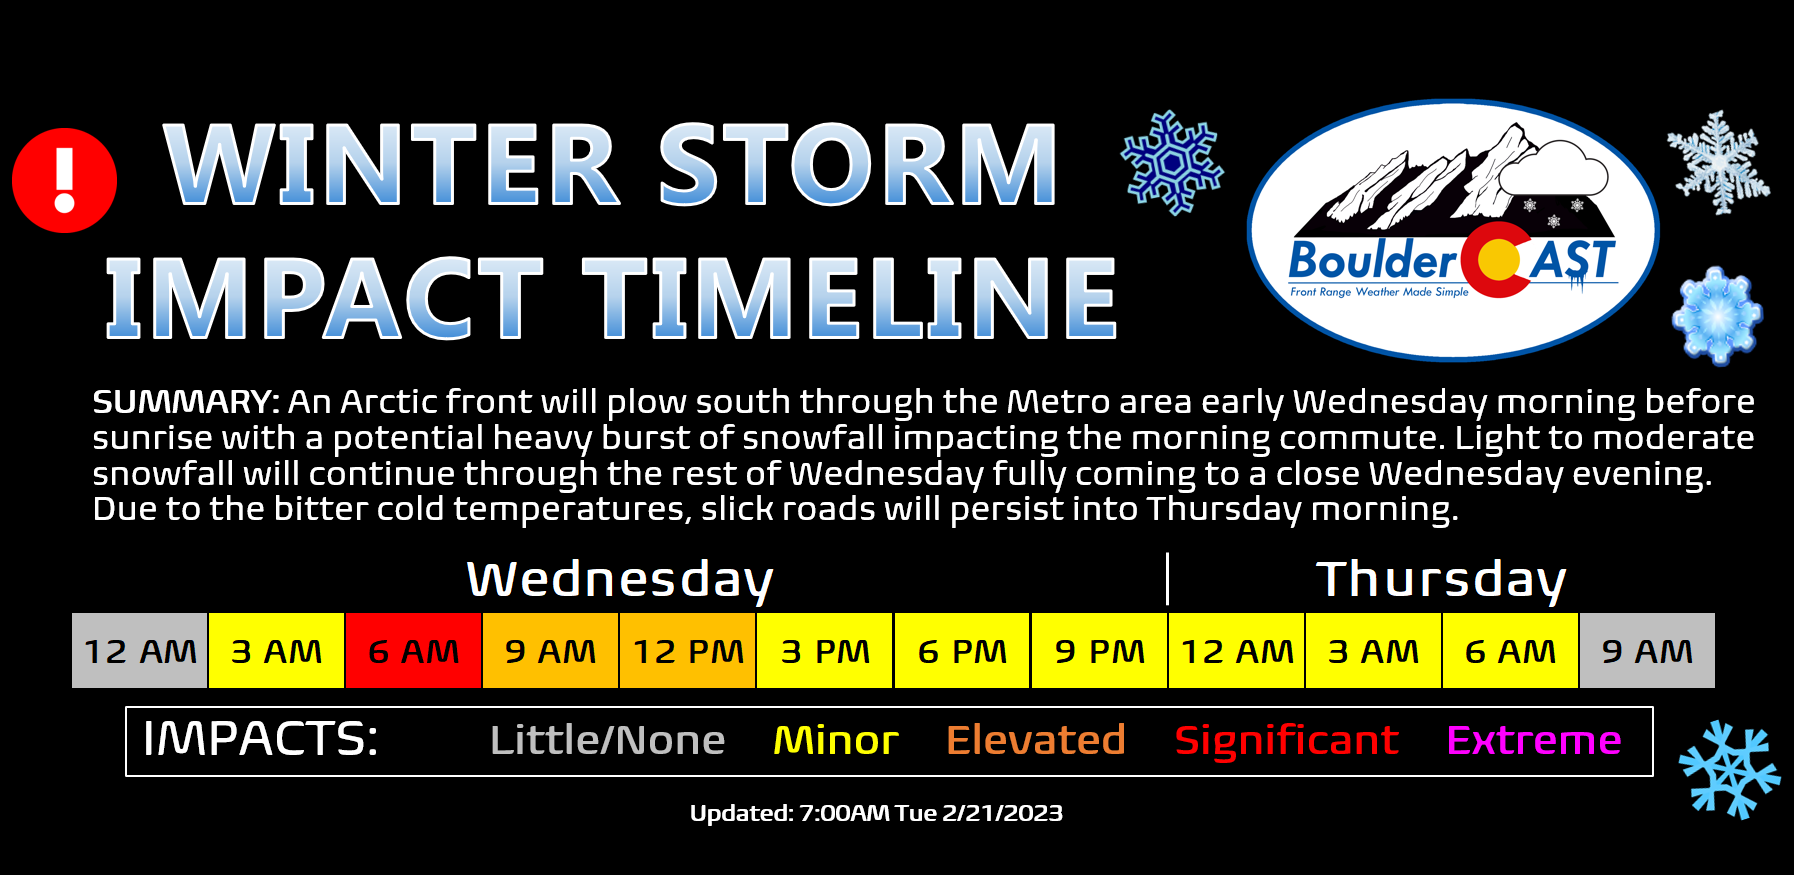 Winter storm will impact central & northeast PA Monday night/Tuesday AM